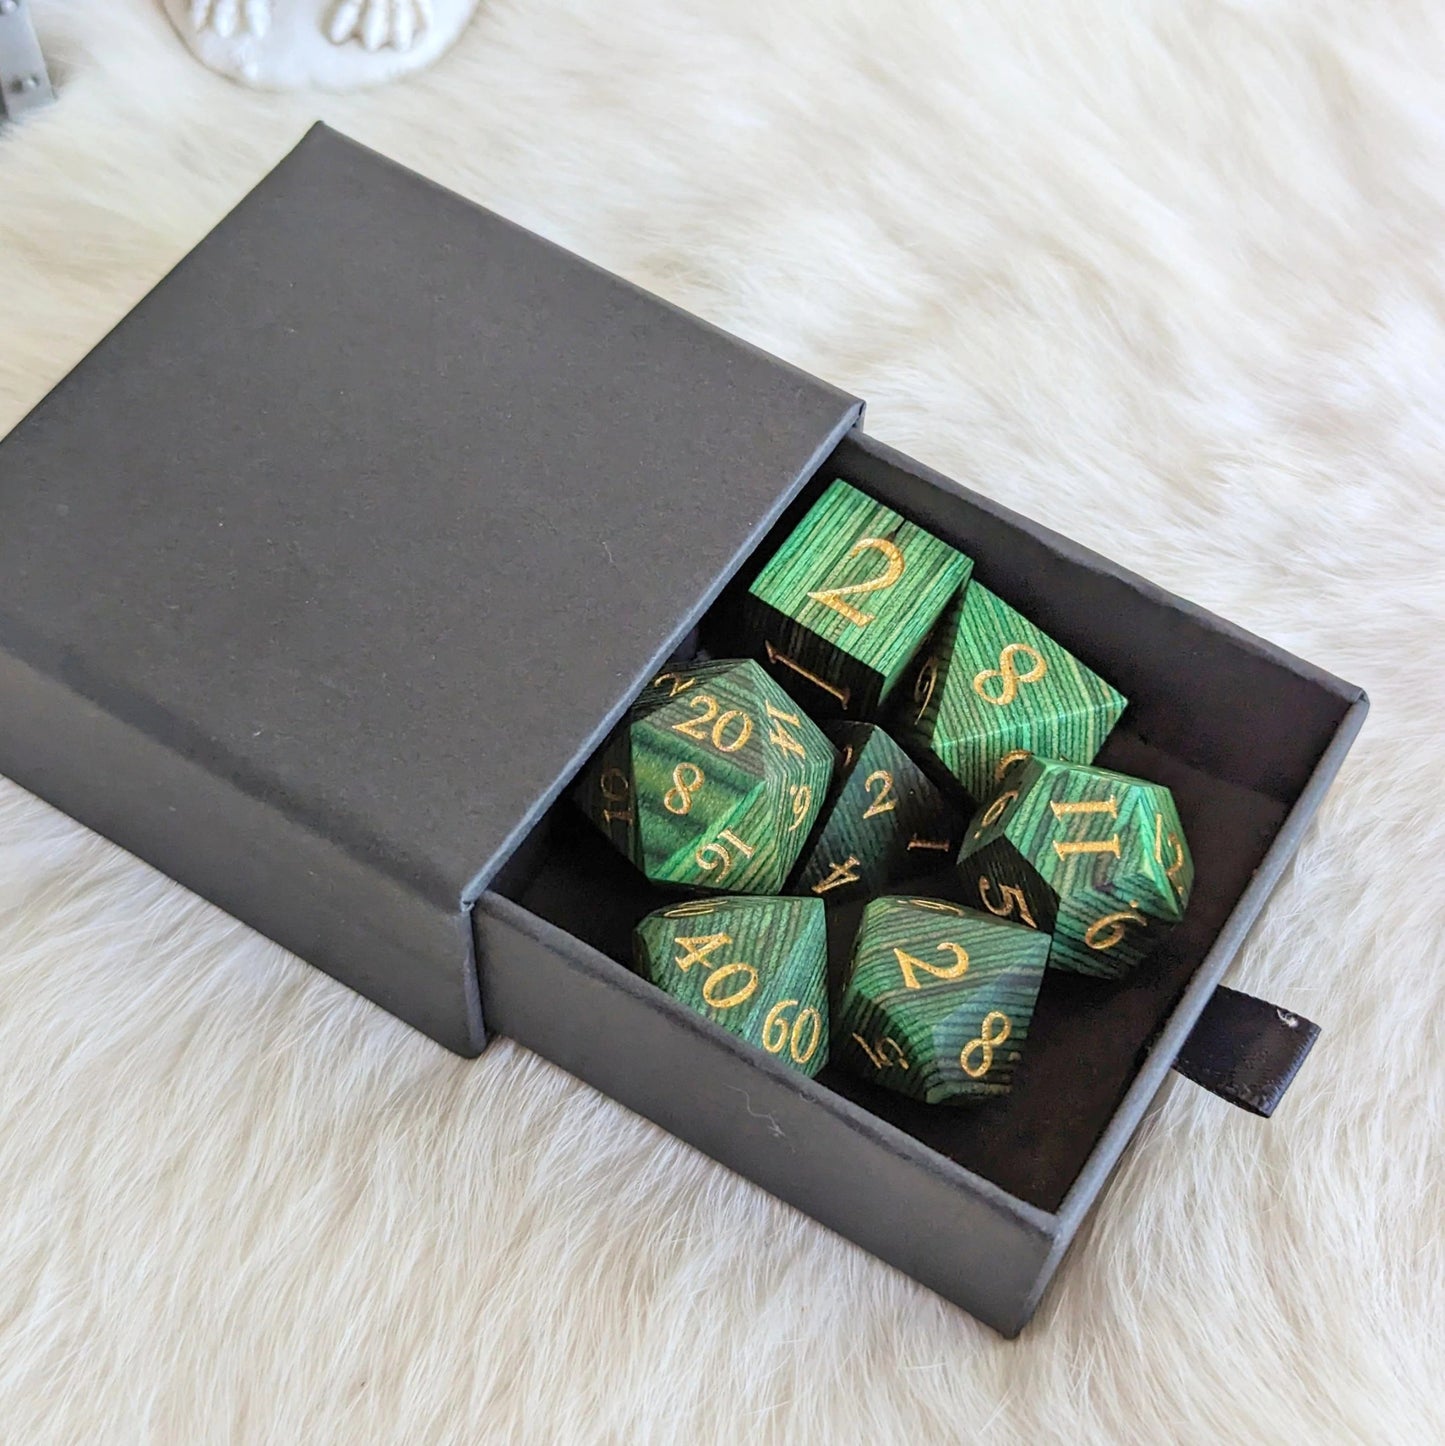 Emerald Green Stripe Wood Dice Set - 7 piece sharp-edge real wood dice set - The Fourth Place